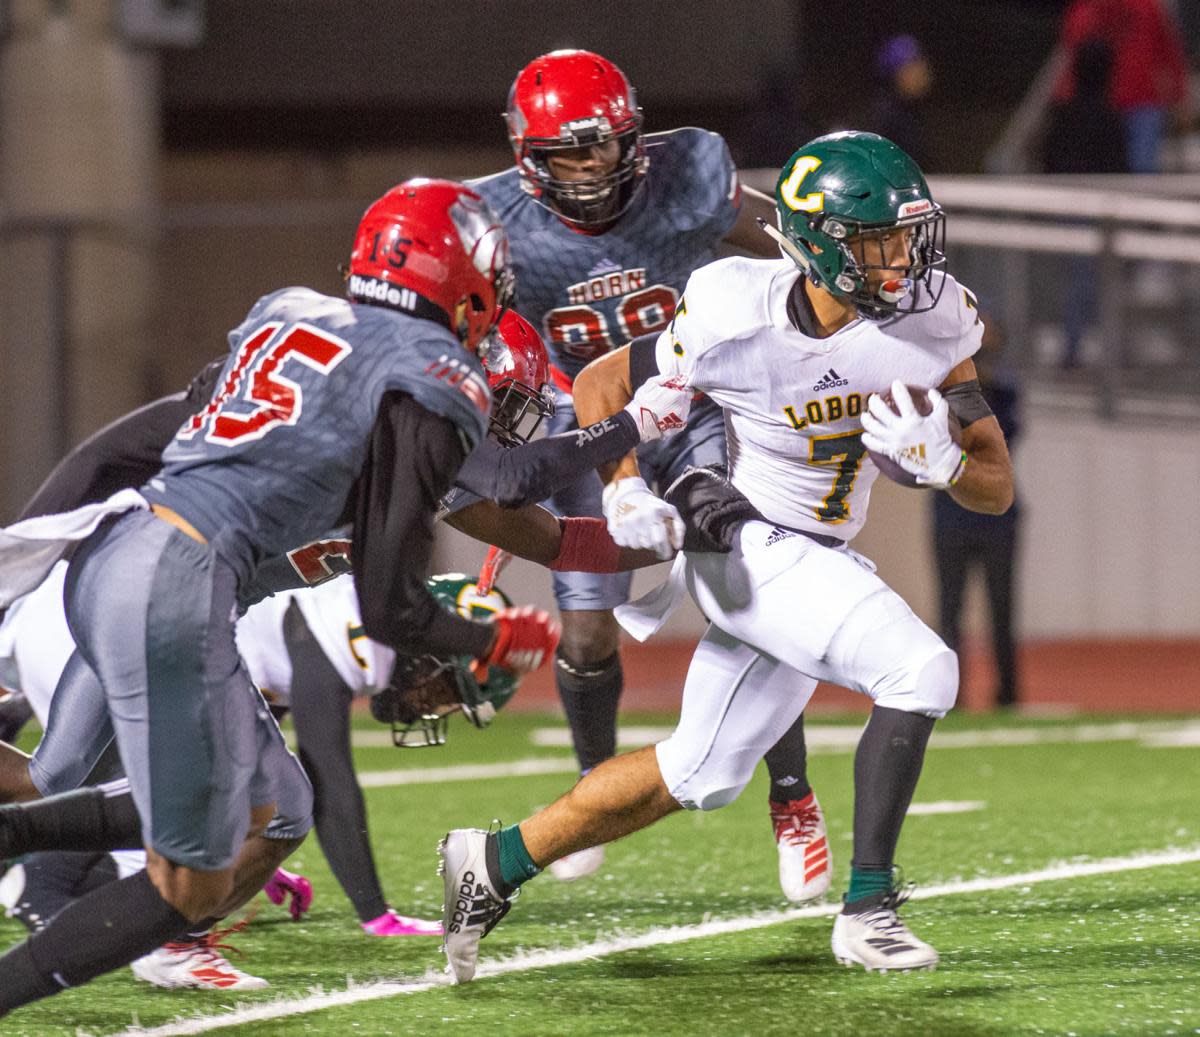 I saw Meredith run through Mesquite Horn for over 200-yards and three touchdowns.